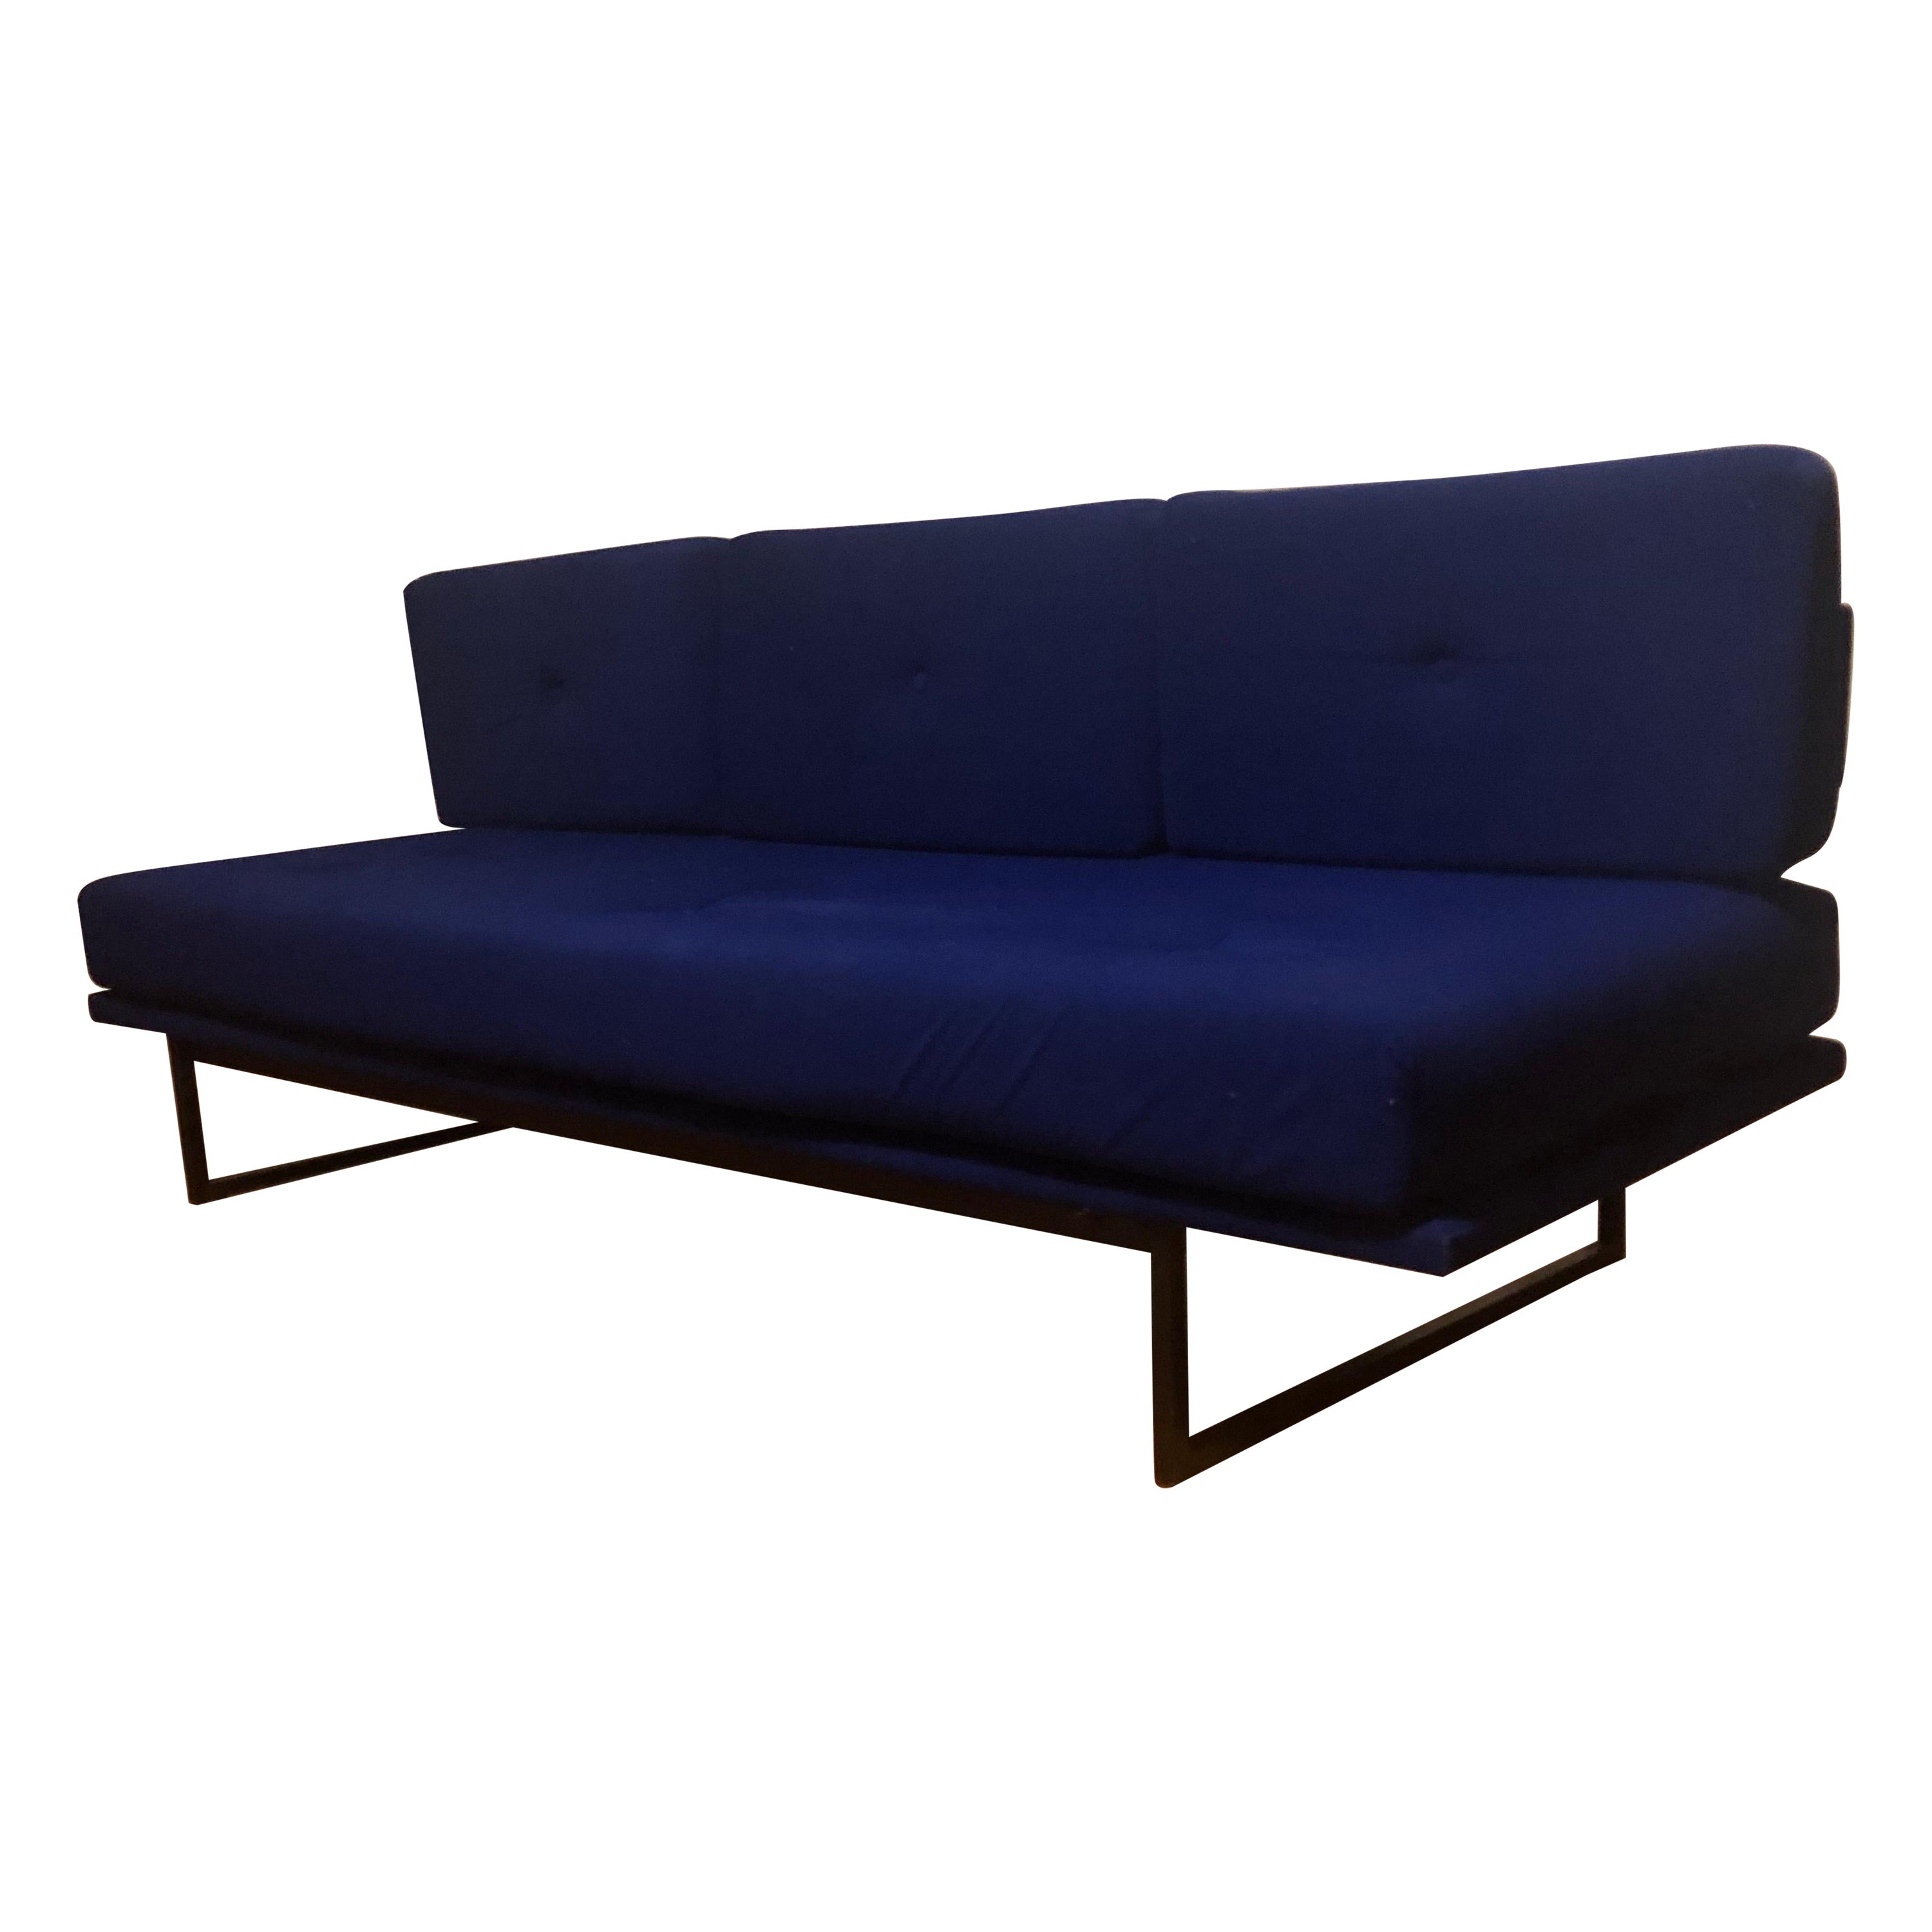 French Mid-Century Modern Sofa / Day Bed by A R P & Yves Klein Blue Style Fabric